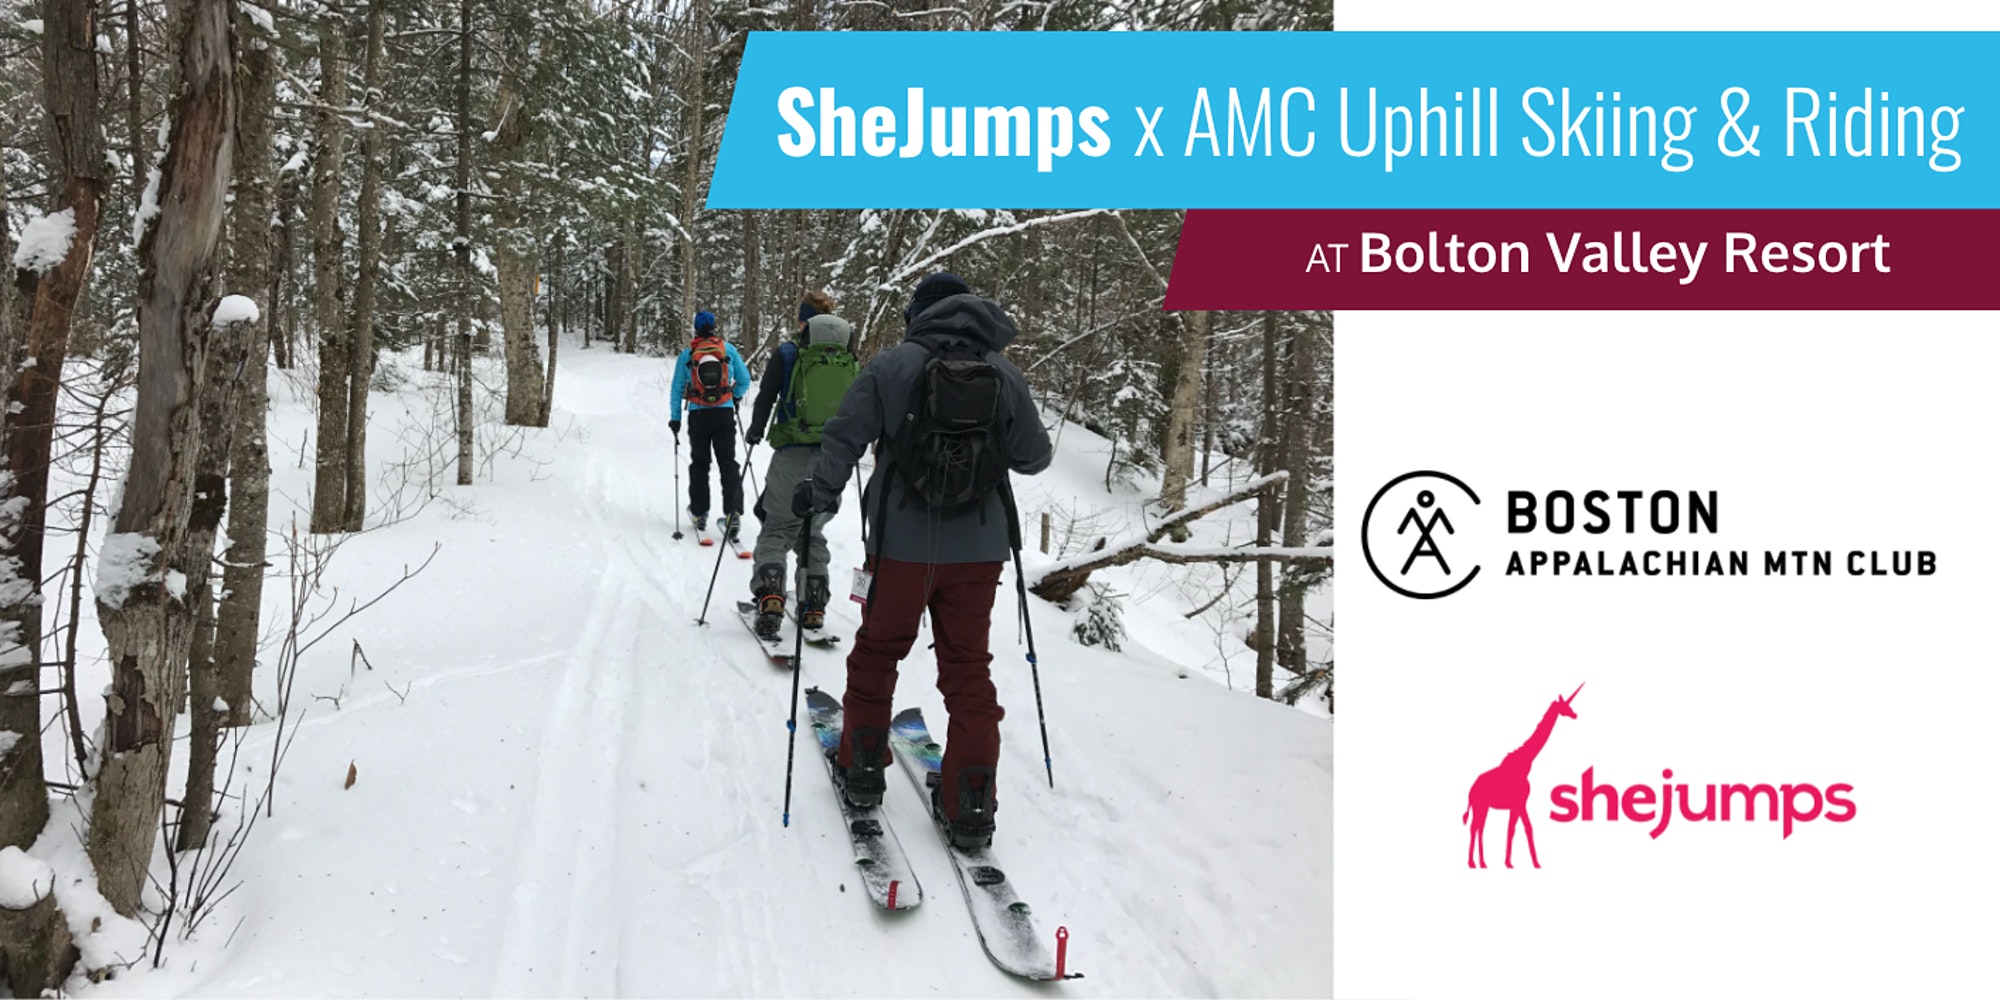 Women skiing in the woods with signage promoting She Jumps and AMC event